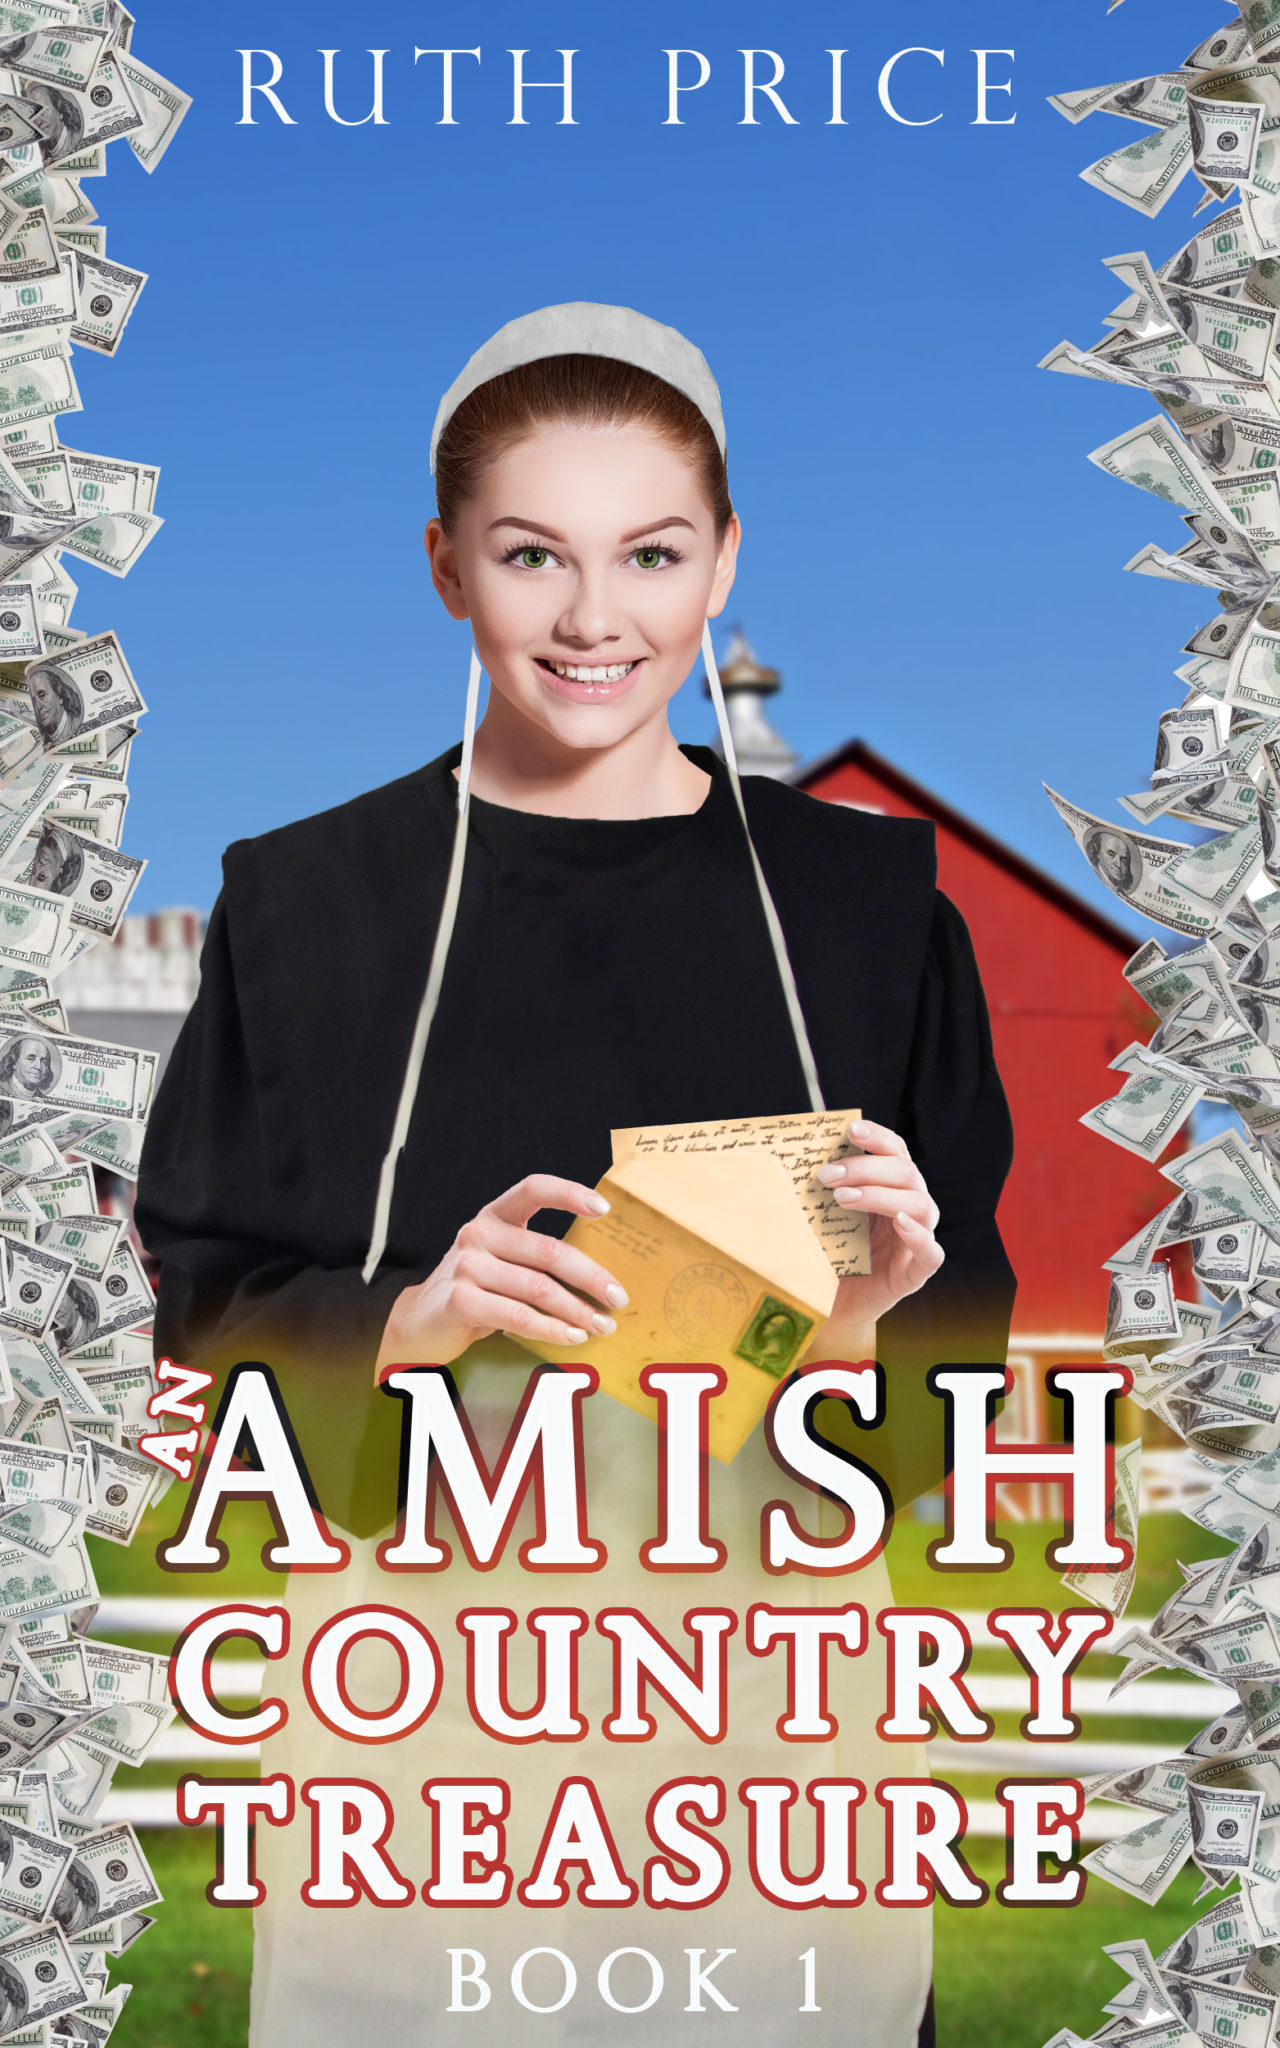 FREE: An Amish Country Treasure by Ruth Price